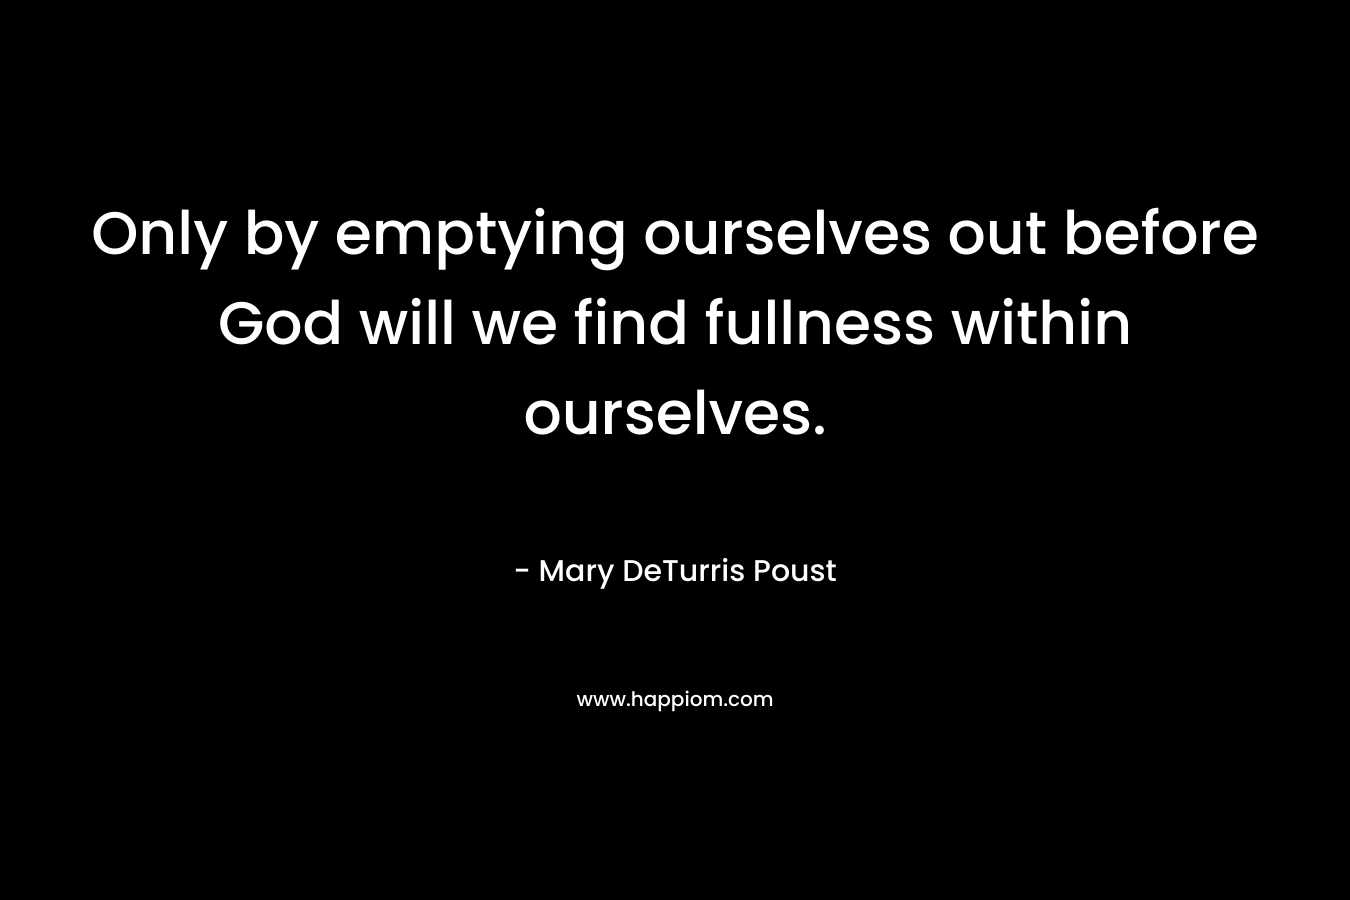 Only by emptying ourselves out before God will we find fullness within ourselves.